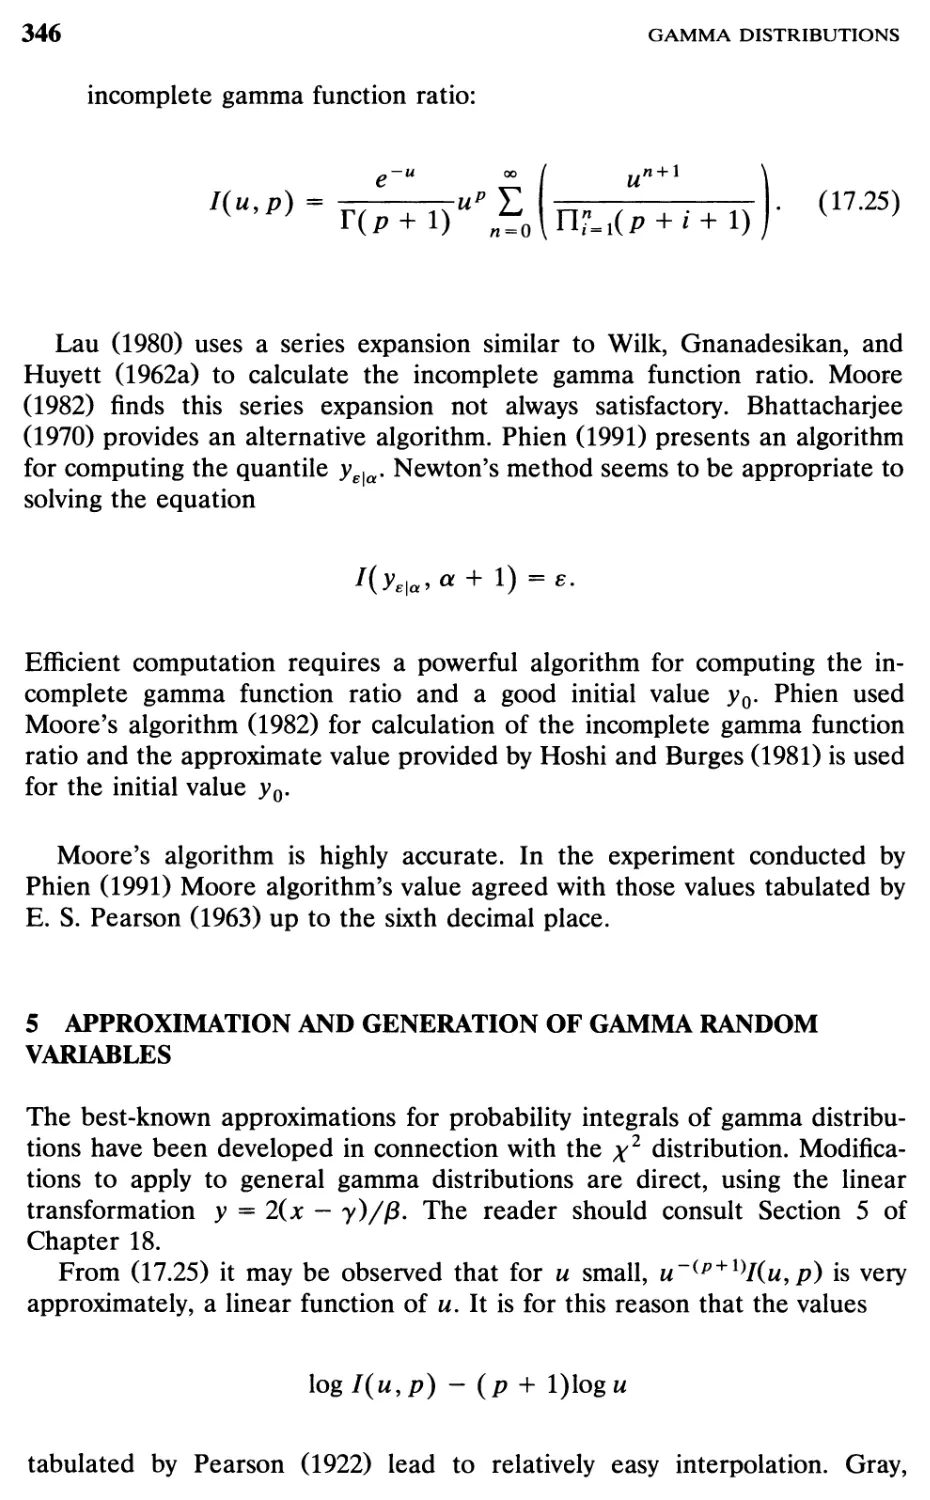 5 Approximation and Generation of Gamma Random Variables, 346